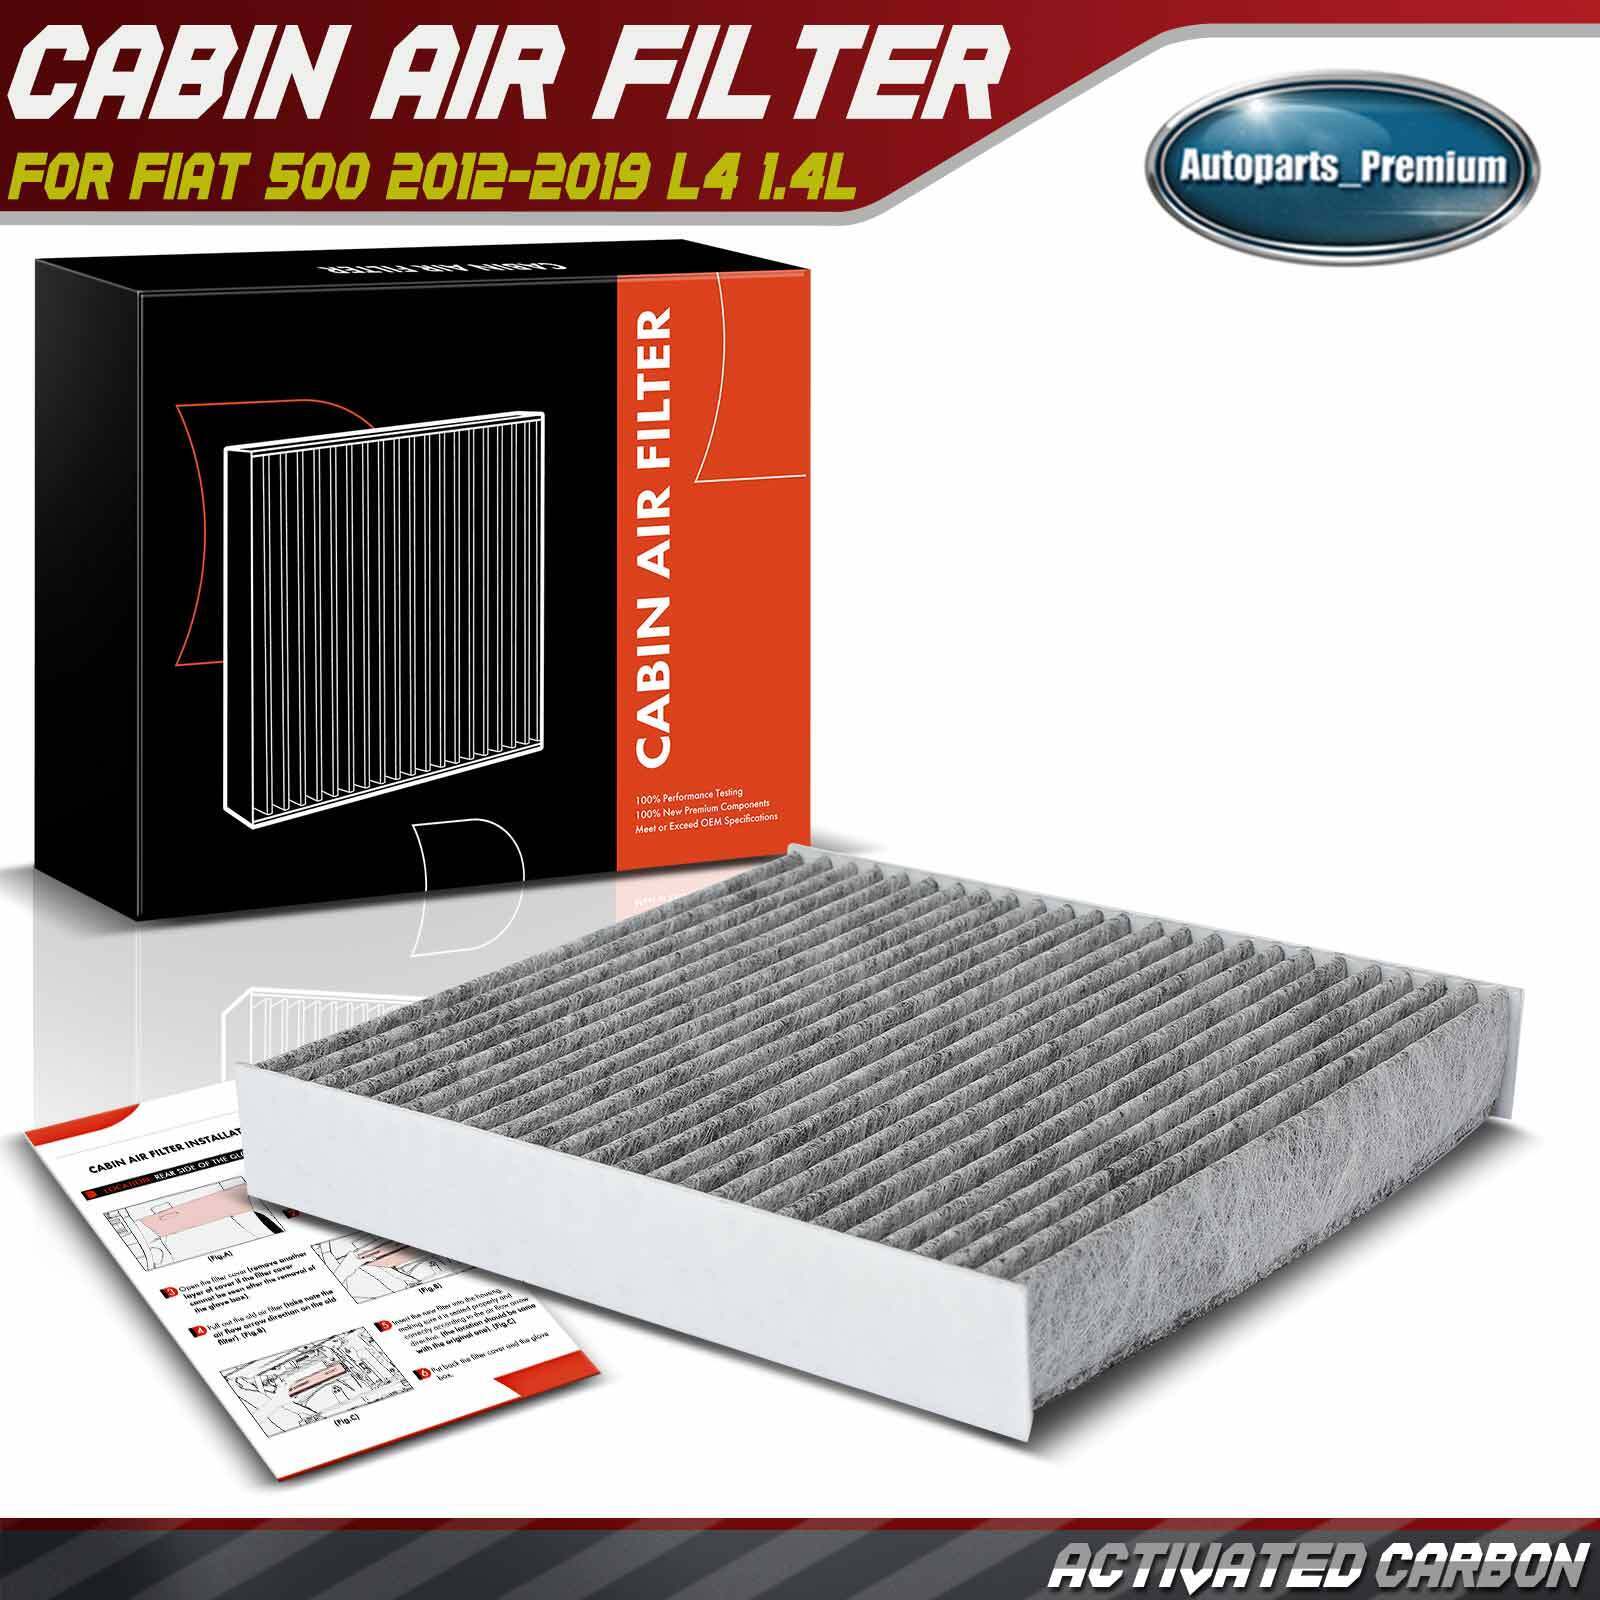 Cabin Air Filter with Activated Carbon for Fiat 500 2012-2019 Center Console